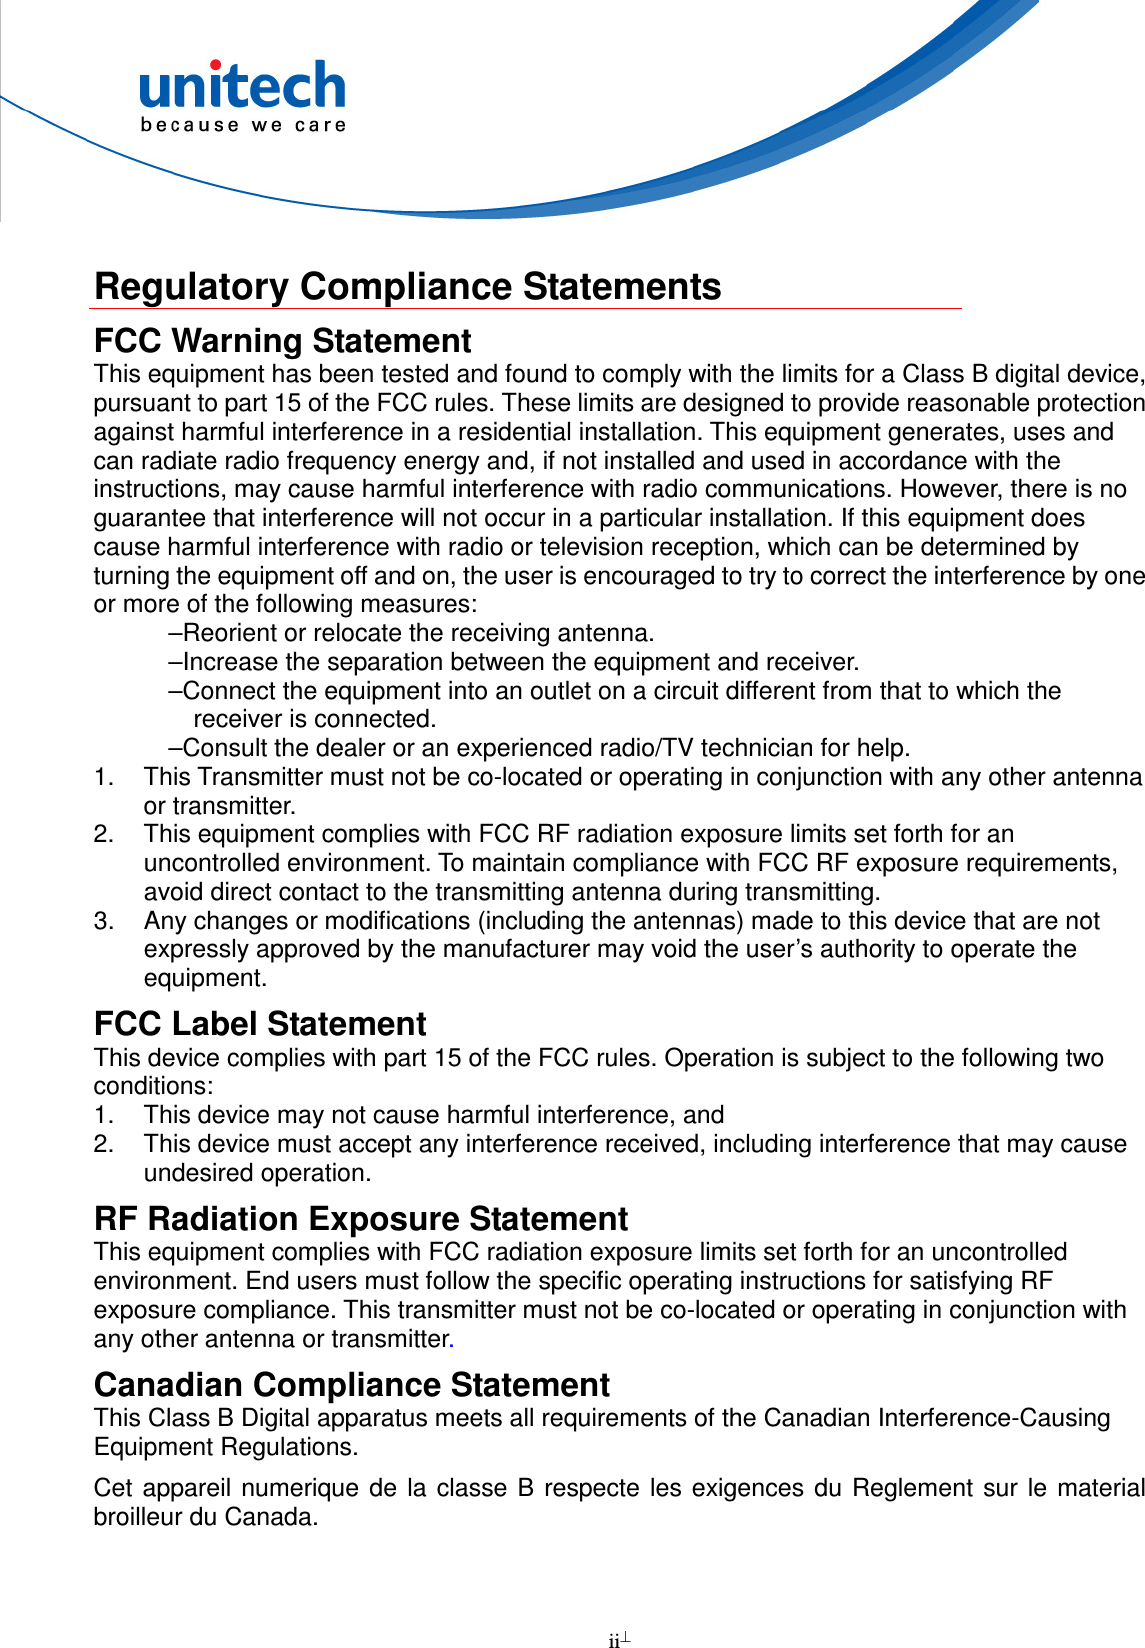  ii   Regulatory Compliance Statements FCC Warning Statement This equipment has been tested and found to comply with the limits for a Class B digital device, pursuant to part 15 of the FCC rules. These limits are designed to provide reasonable protection against harmful interference in a residential installation. This equipment generates, uses and can radiate radio frequency energy and, if not installed and used in accordance with the instructions, may cause harmful interference with radio communications. However, there is no guarantee that interference will not occur in a particular installation. If this equipment does cause harmful interference with radio or television reception, which can be determined by turning the equipment off and on, the user is encouraged to try to correct the interference by one or more of the following measures: –Reorient or relocate the receiving antenna. –Increase the separation between the equipment and receiver. –Connect the equipment into an outlet on a circuit different from that to which the receiver is connected. –Consult the dealer or an experienced radio/TV technician for help. 1.  This Transmitter must not be co-located or operating in conjunction with any other antenna or transmitter. 2.  This equipment complies with FCC RF radiation exposure limits set forth for an uncontrolled environment. To maintain compliance with FCC RF exposure requirements, avoid direct contact to the transmitting antenna during transmitting. 3.  Any changes or modifications (including the antennas) made to this device that are not expressly approved by the manufacturer may void the user’s authority to operate the equipment. FCC Label Statement This device complies with part 15 of the FCC rules. Operation is subject to the following two conditions: 1.  This device may not cause harmful interference, and 2.  This device must accept any interference received, including interference that may cause undesired operation. RF Radiation Exposure Statement This equipment complies with FCC radiation exposure limits set forth for an uncontrolled environment. End users must follow the specific operating instructions for satisfying RF exposure compliance. This transmitter must not be co-located or operating in conjunction with any other antenna or transmitter. Canadian Compliance Statement This Class B Digital apparatus meets all requirements of the Canadian Interference-Causing Equipment Regulations. Cet  appareil numerique de la classe  B  respecte les exigences du Reglement sur  le  material broilleur du Canada.